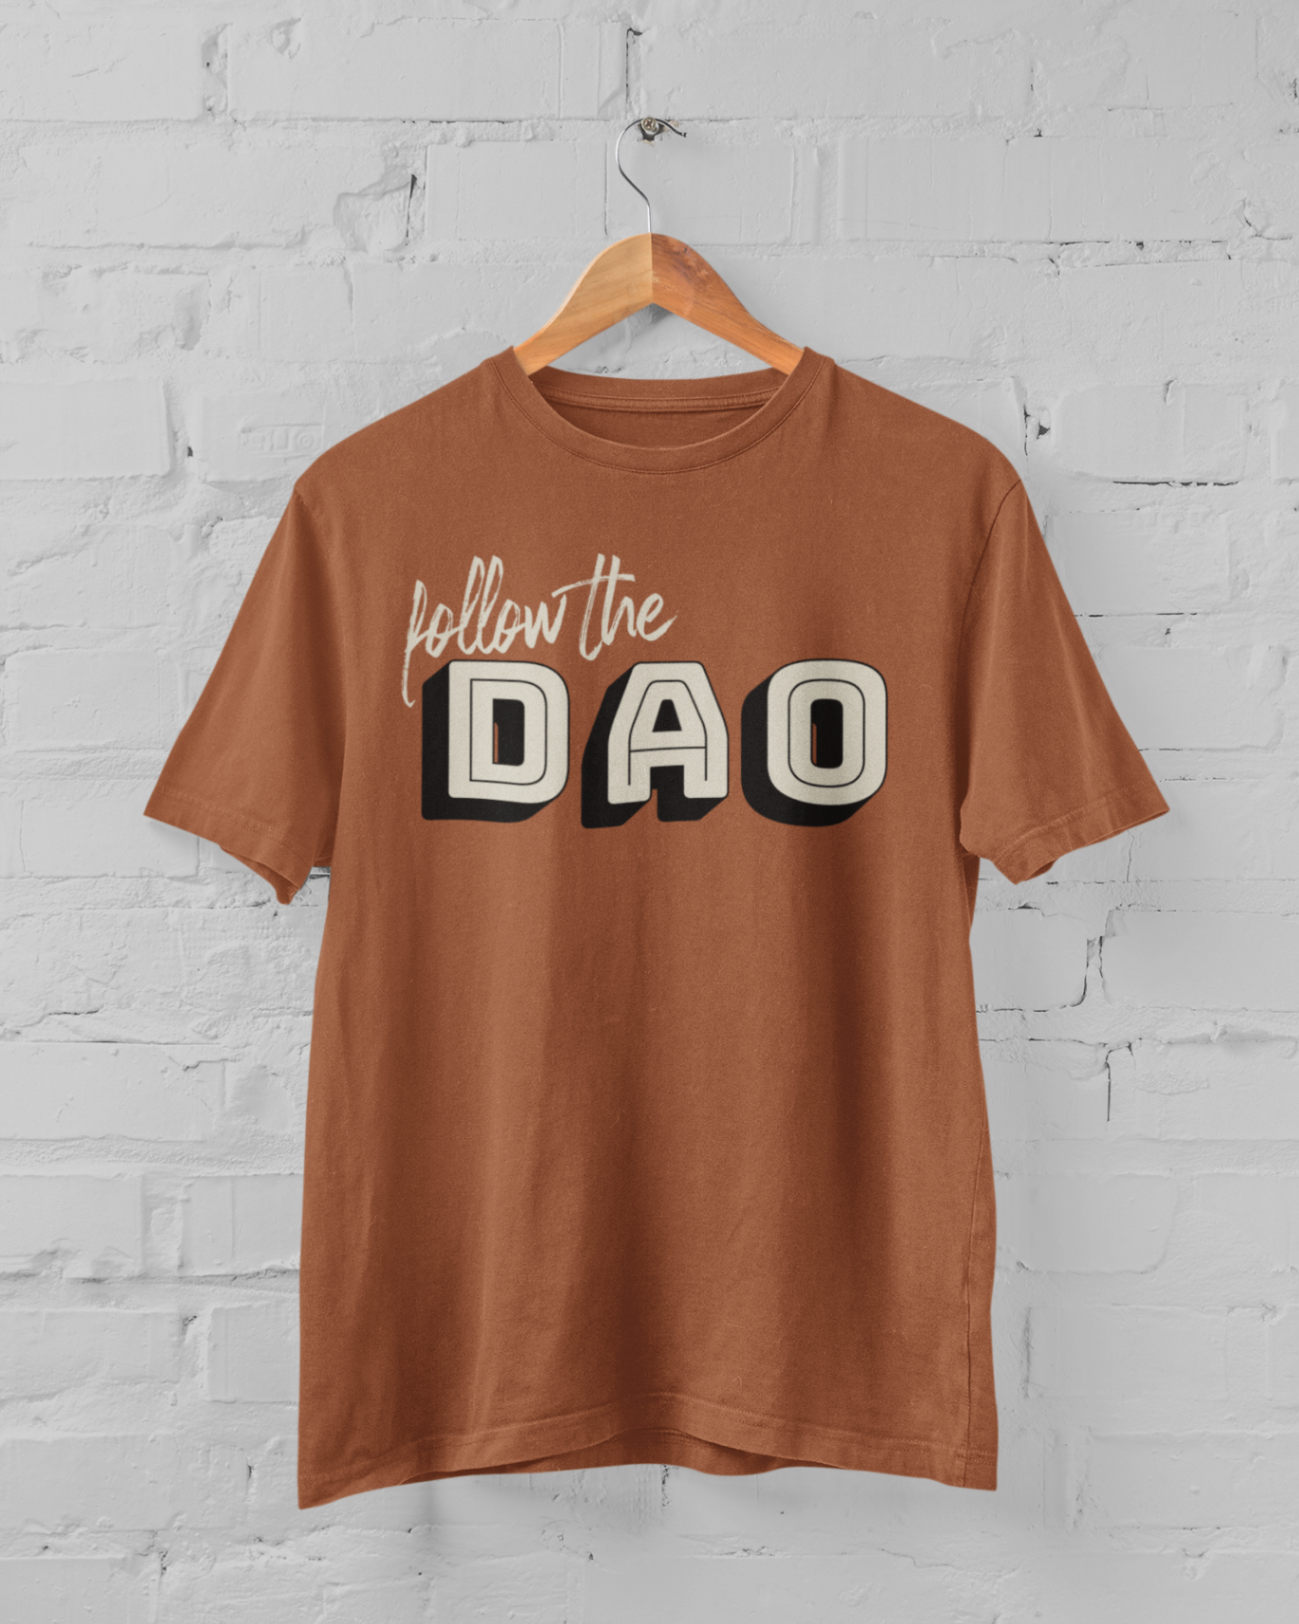 an autumn coloured t shirt with follow the dao design on a hangar in front of a white brick backround